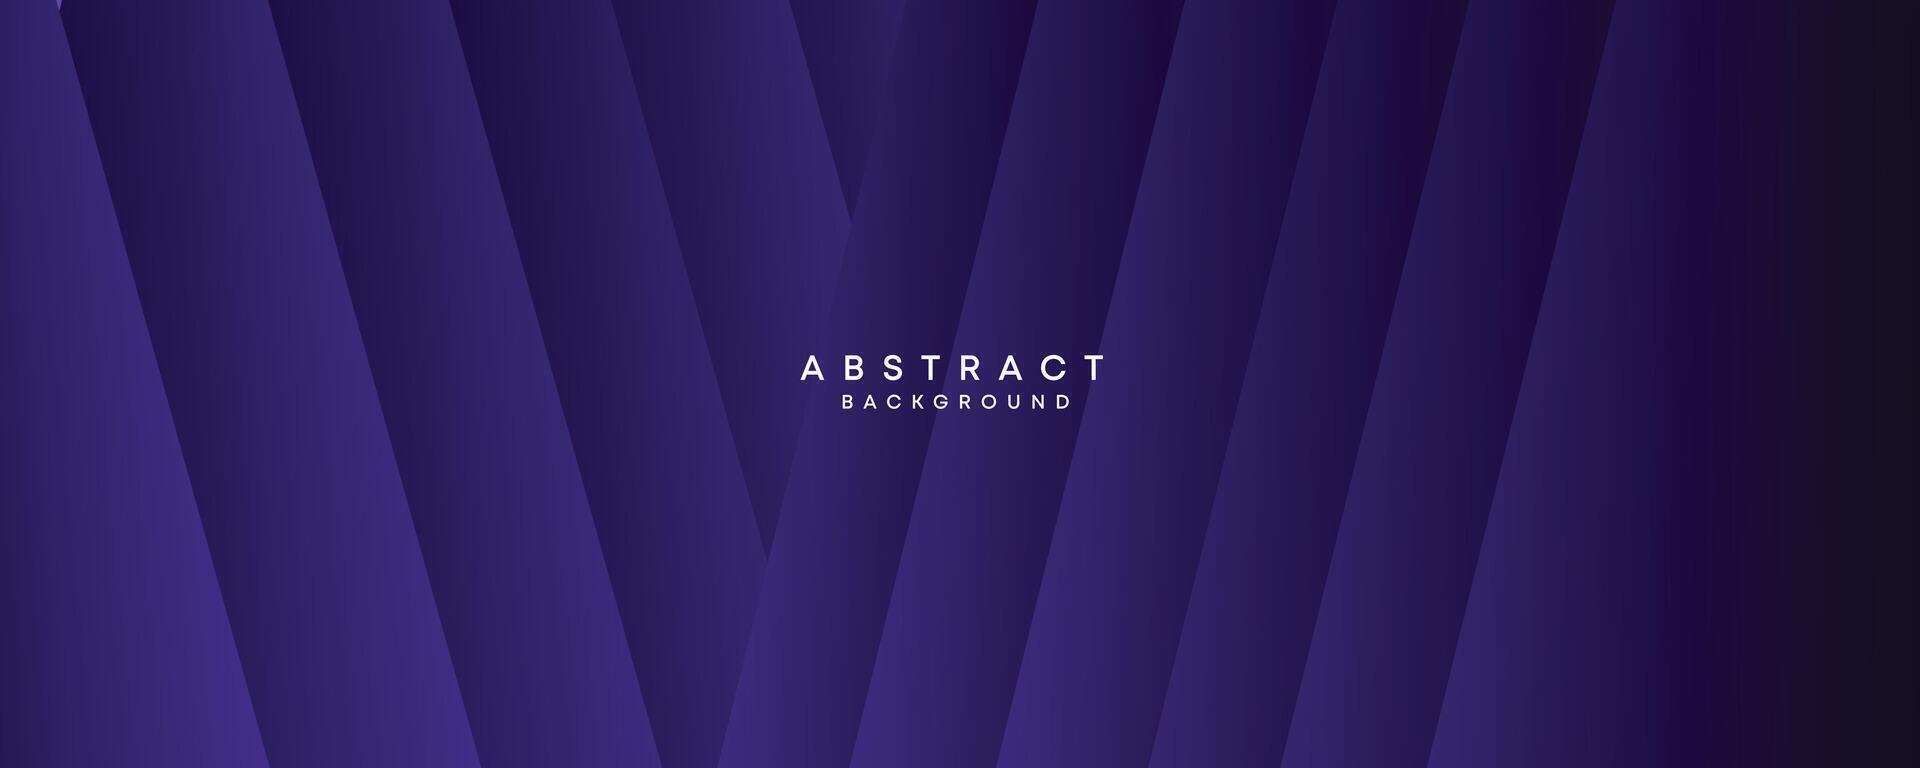 diagonal geometric overlay layer on an abstract dark purple banner design background. Contemporary graphic elements in the shape of squares. Makes a good cover, header, banner, brochure, or website vector